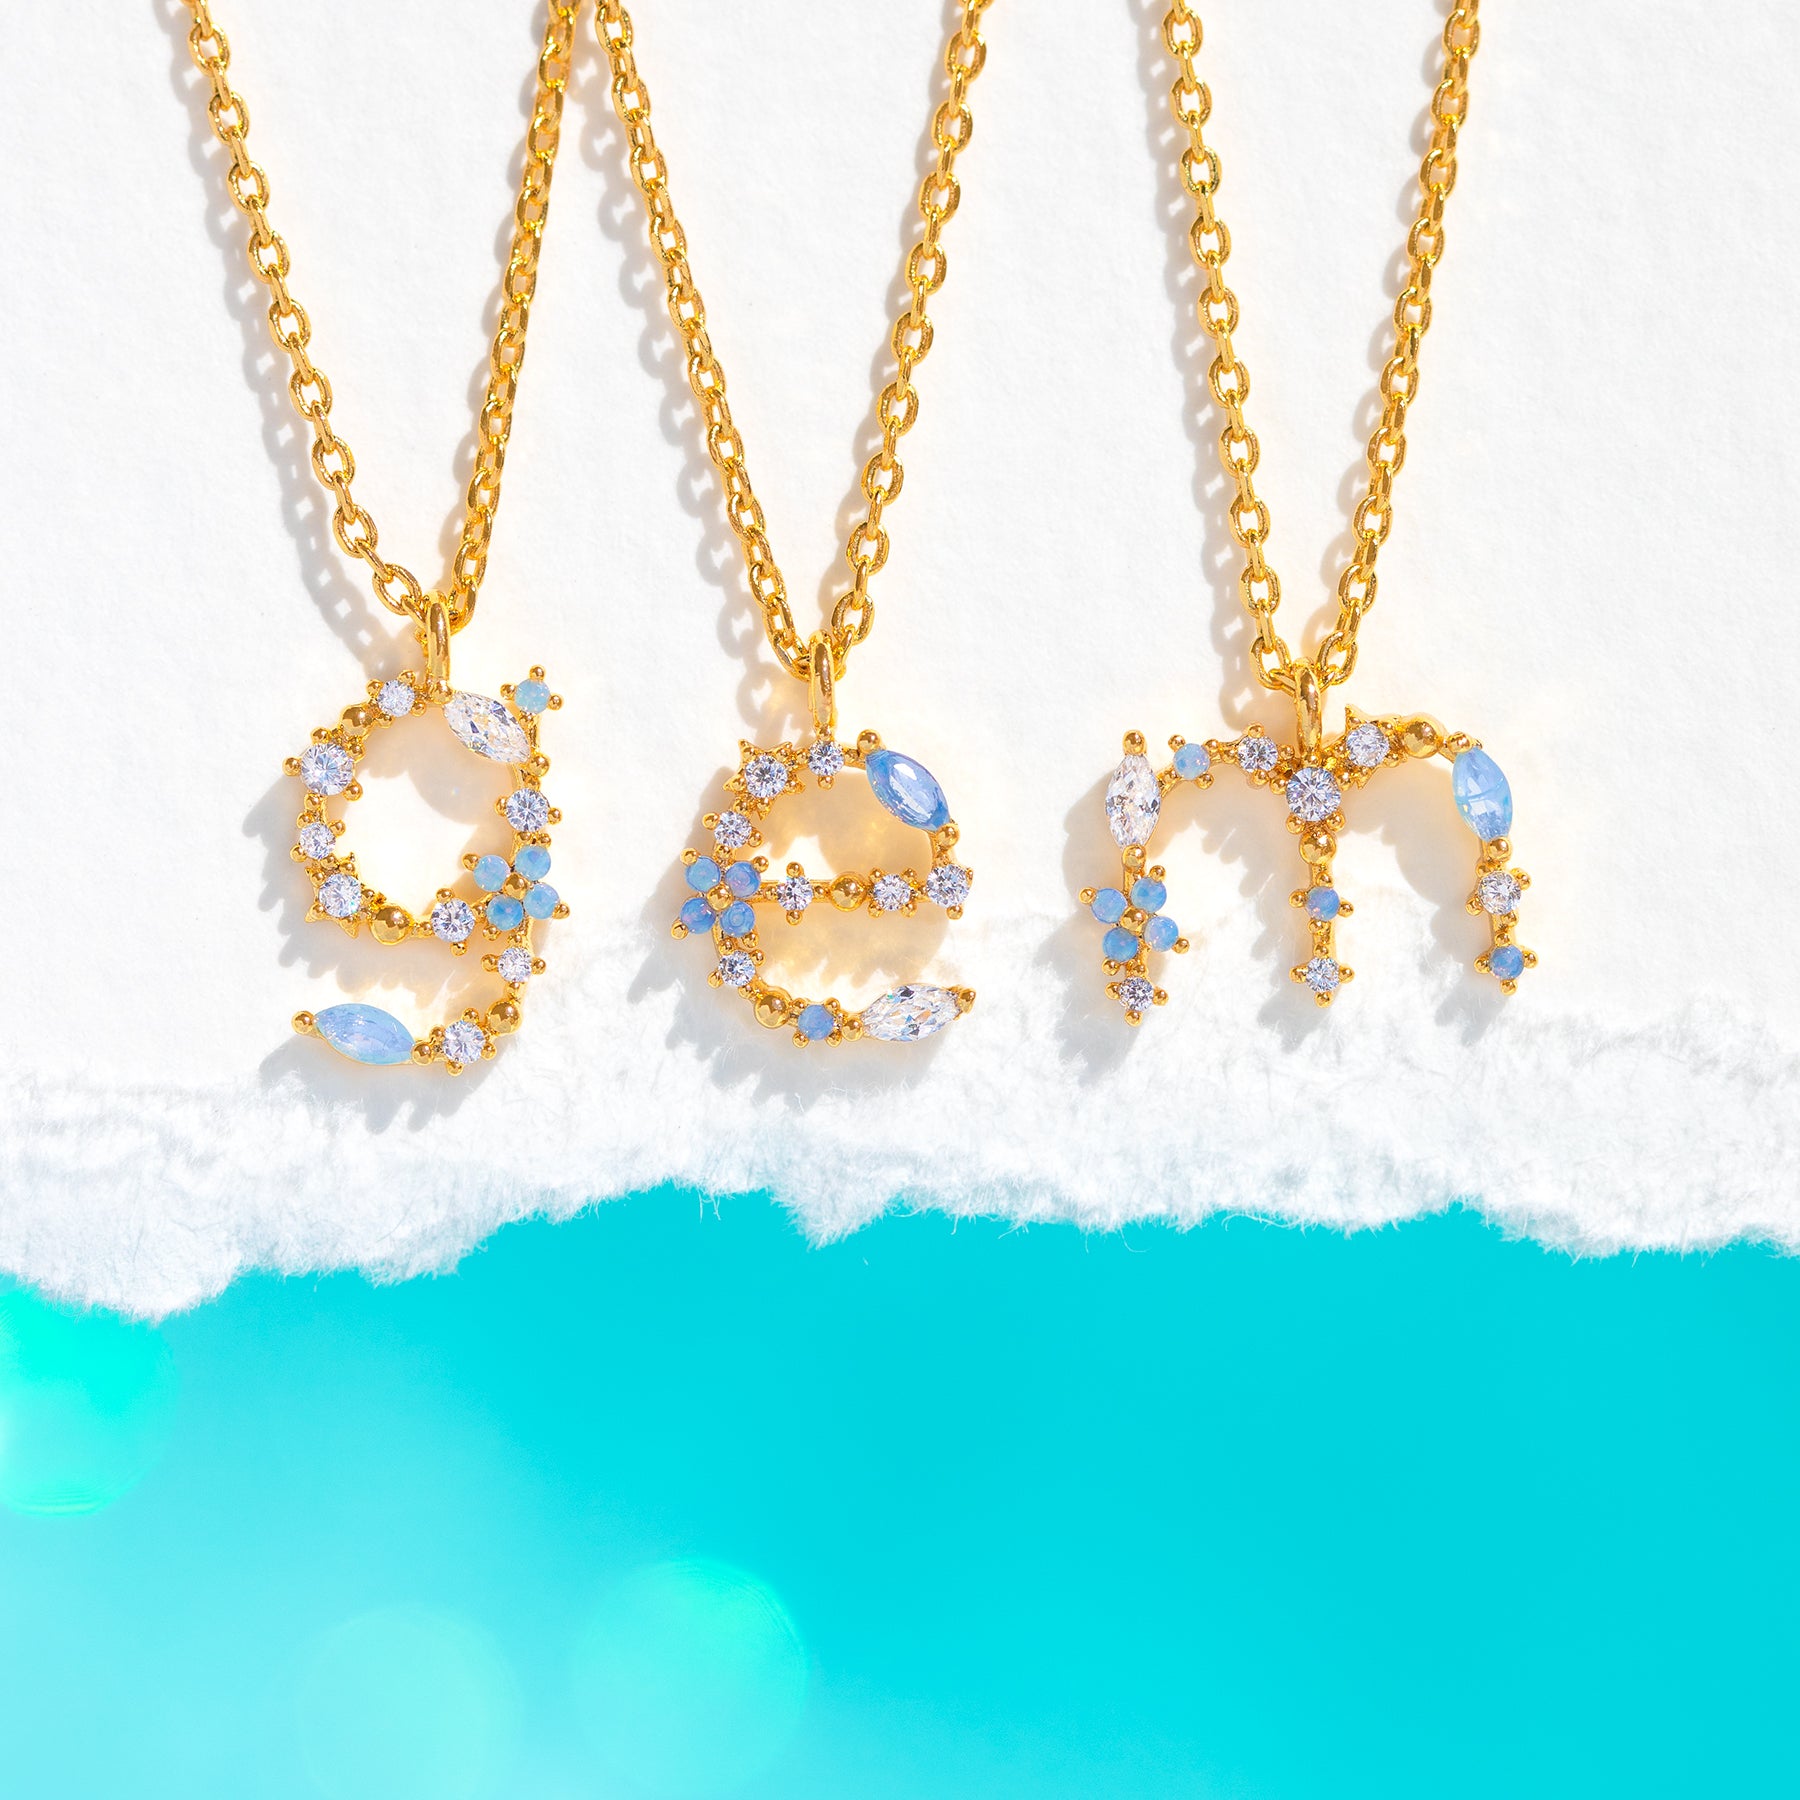 18ct gold initial necklace set with coloured cubic zirconia | Laval Europe